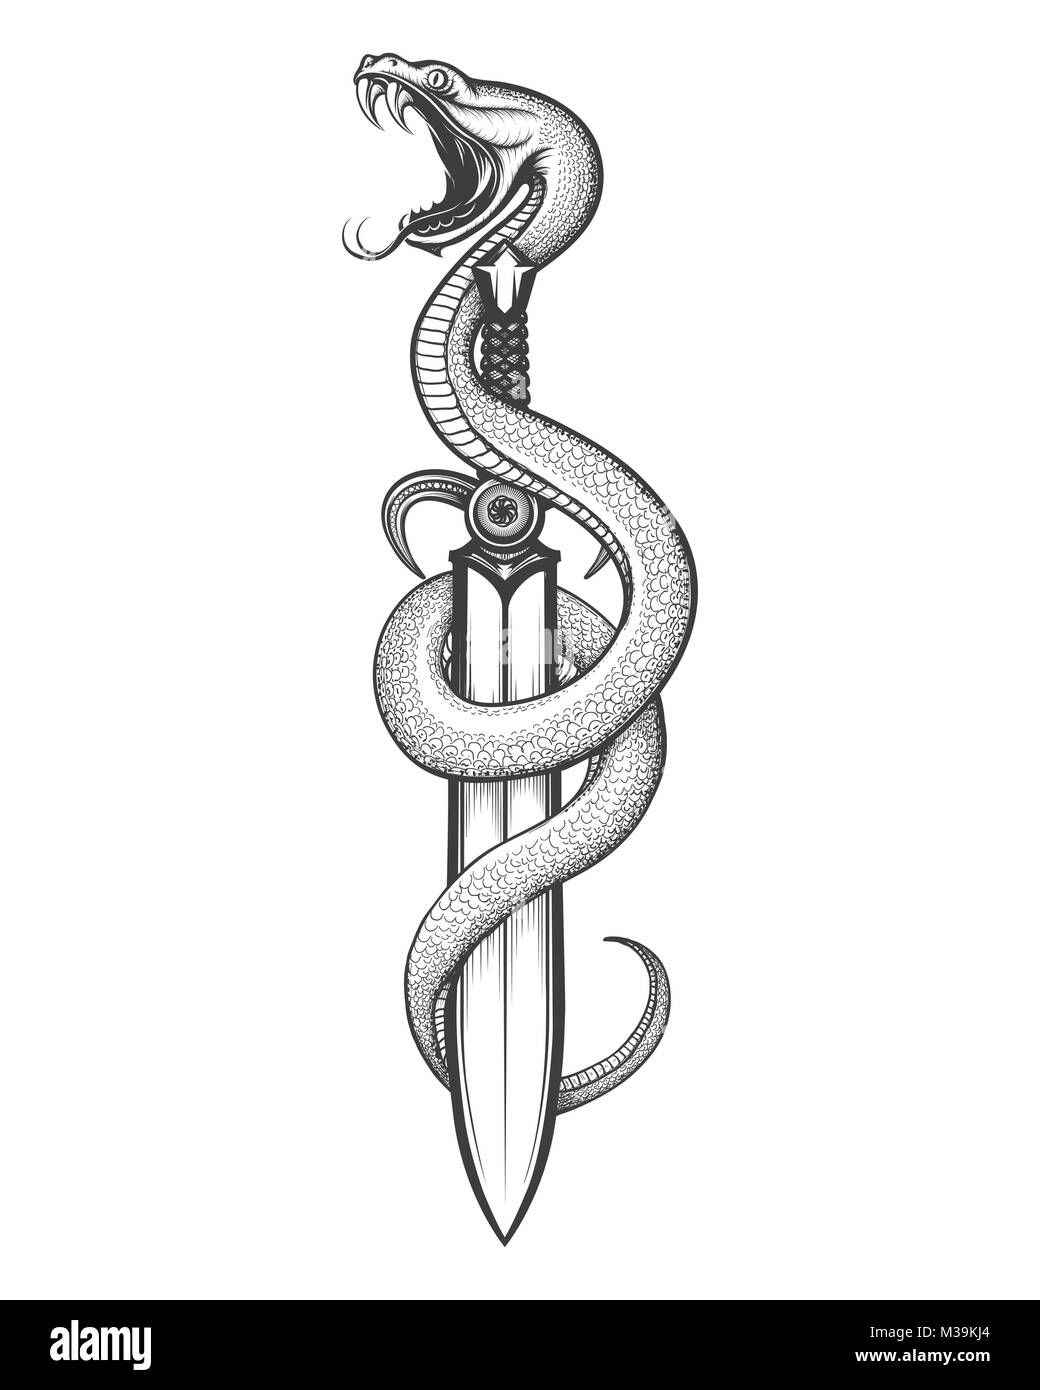 Snake and Sword drawn in tattoo style. Vector illustration. Stock Vector